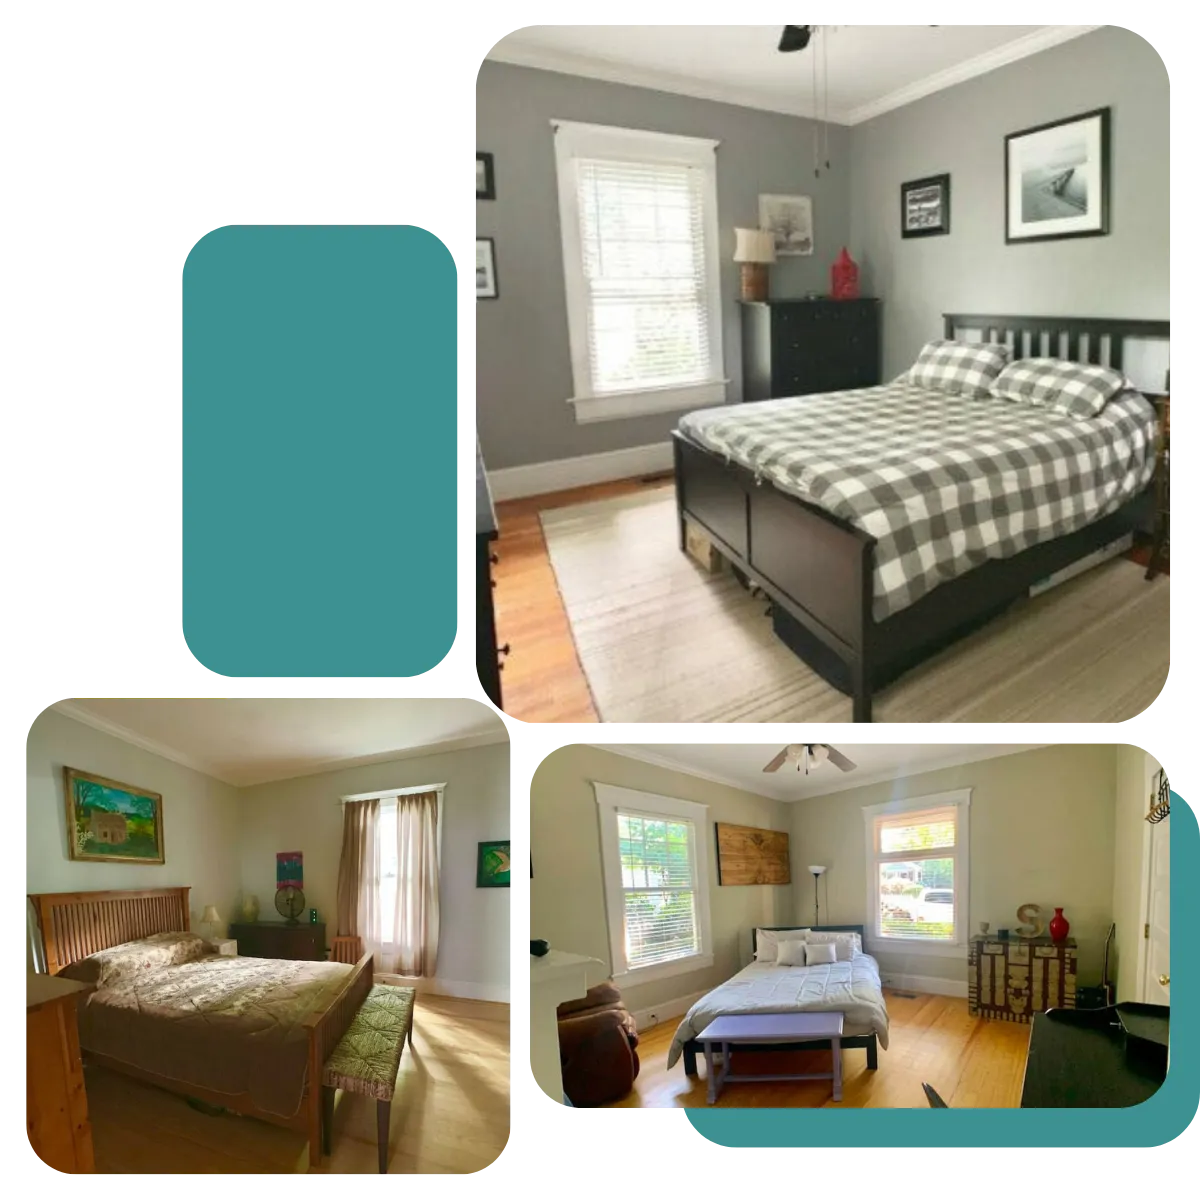 Rest easy on comfy queen beds in the Plaza Midwood Bungalow's bedrooms, with cozy vintage decor to help you relax.